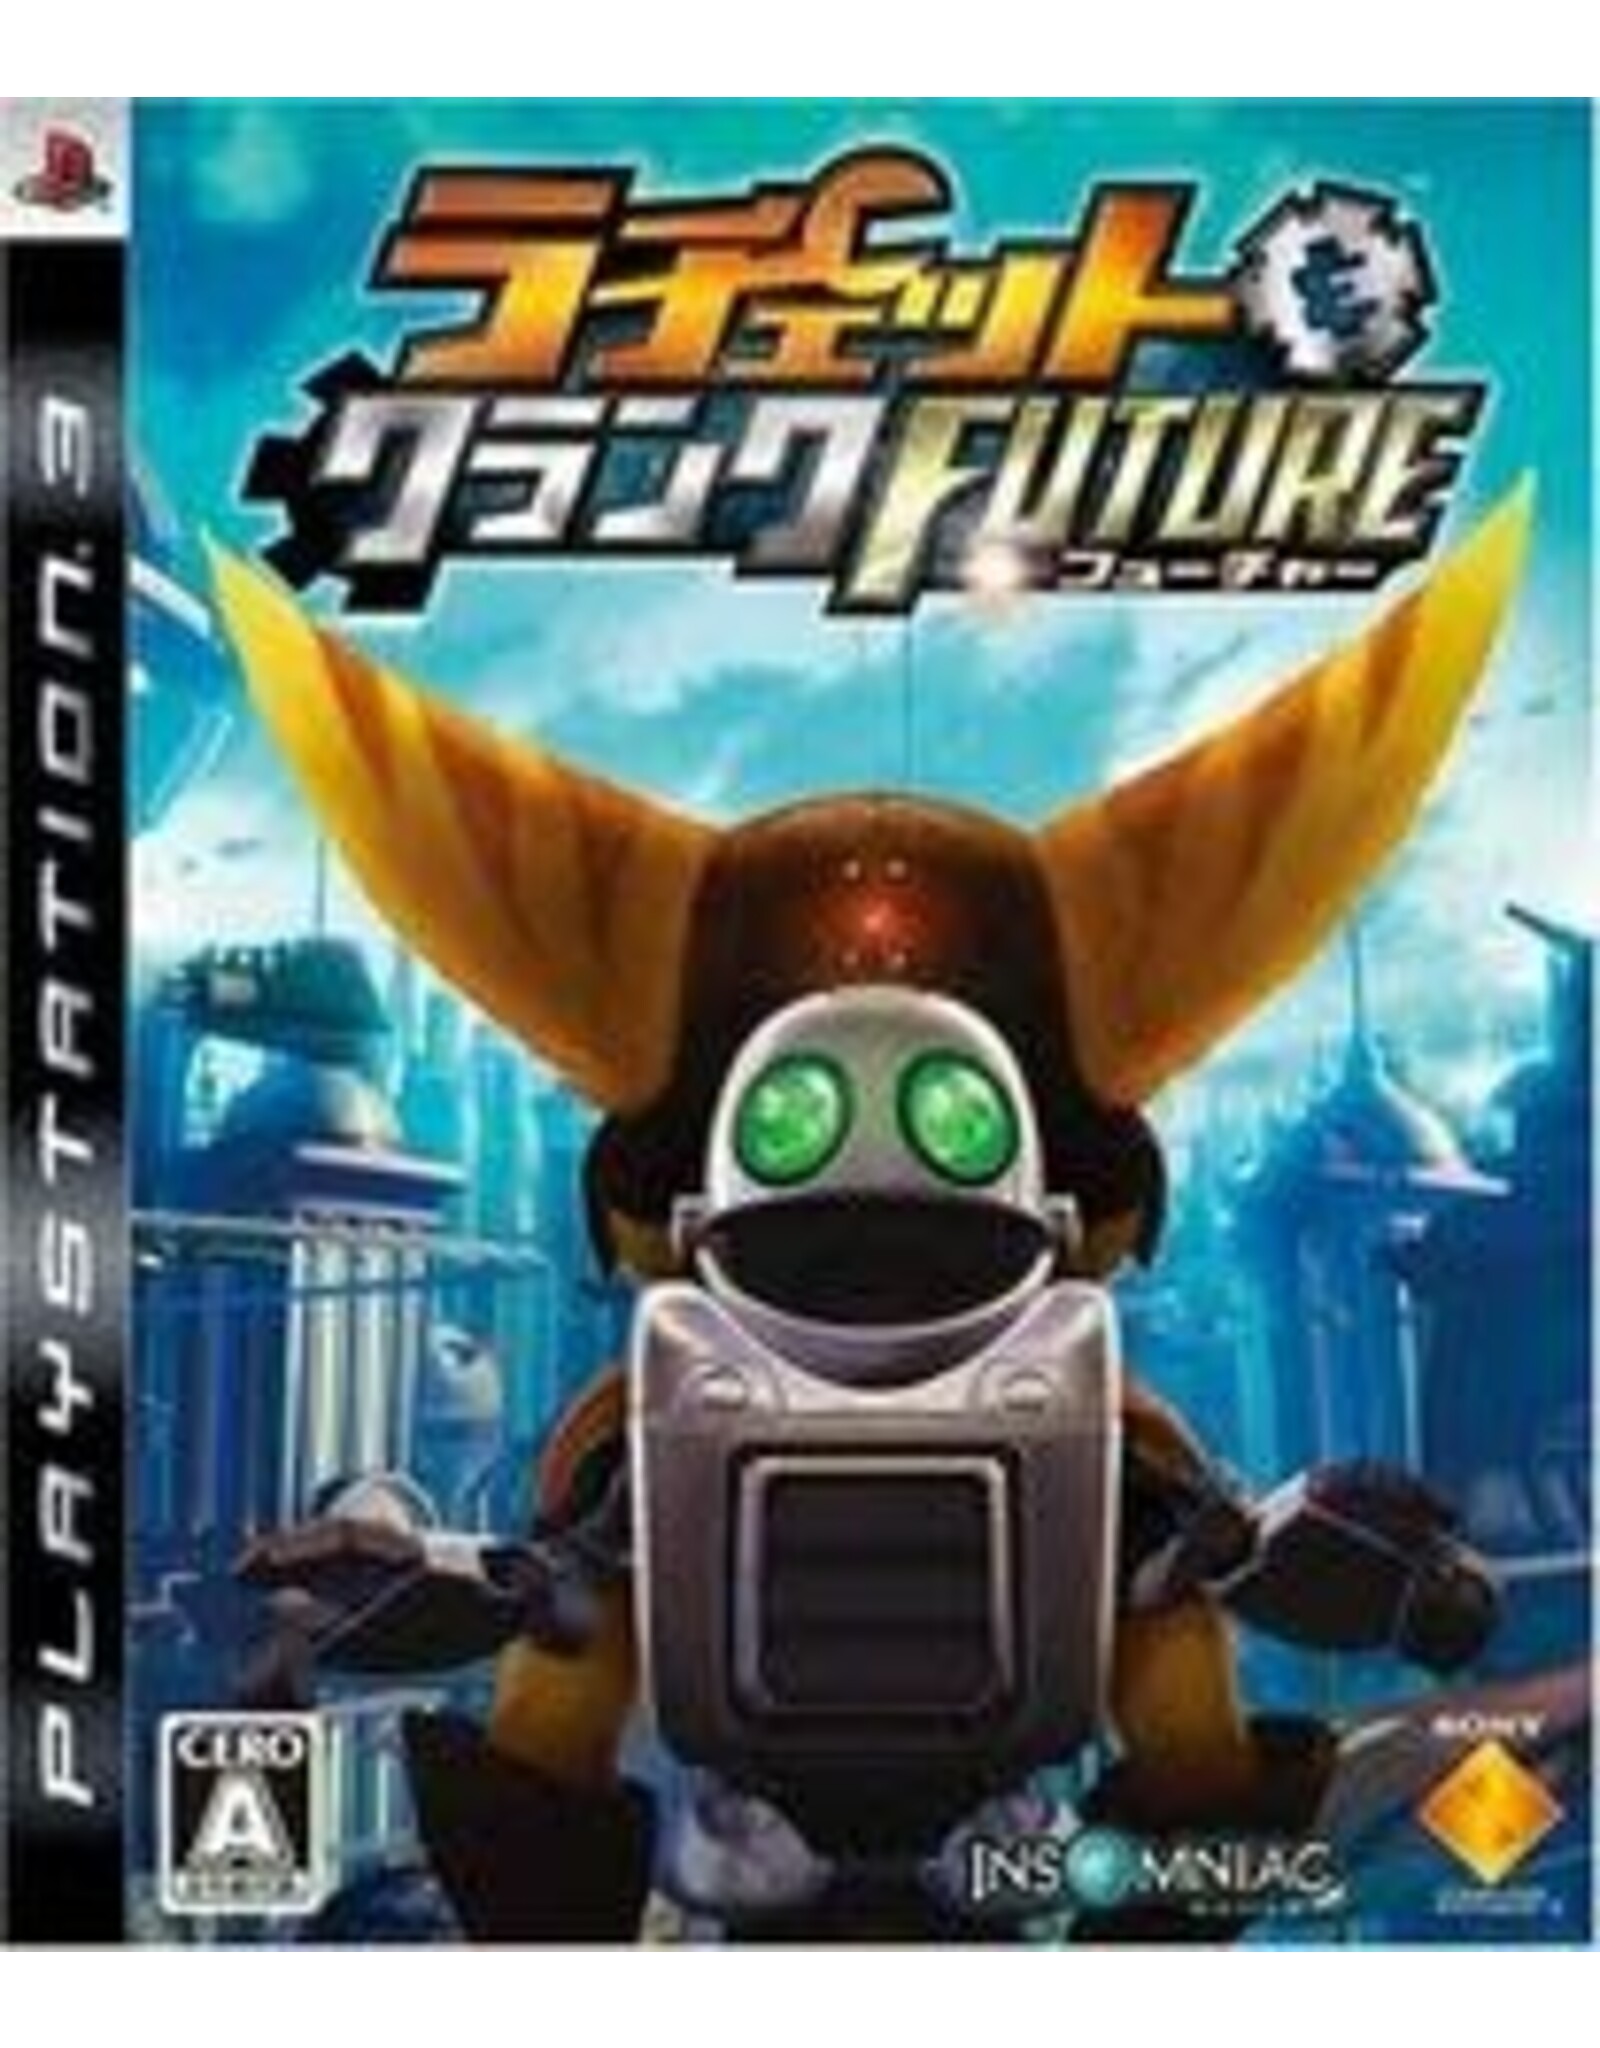 Playstation 3 Ratchet and Clank: Future (CiB, JP Import)